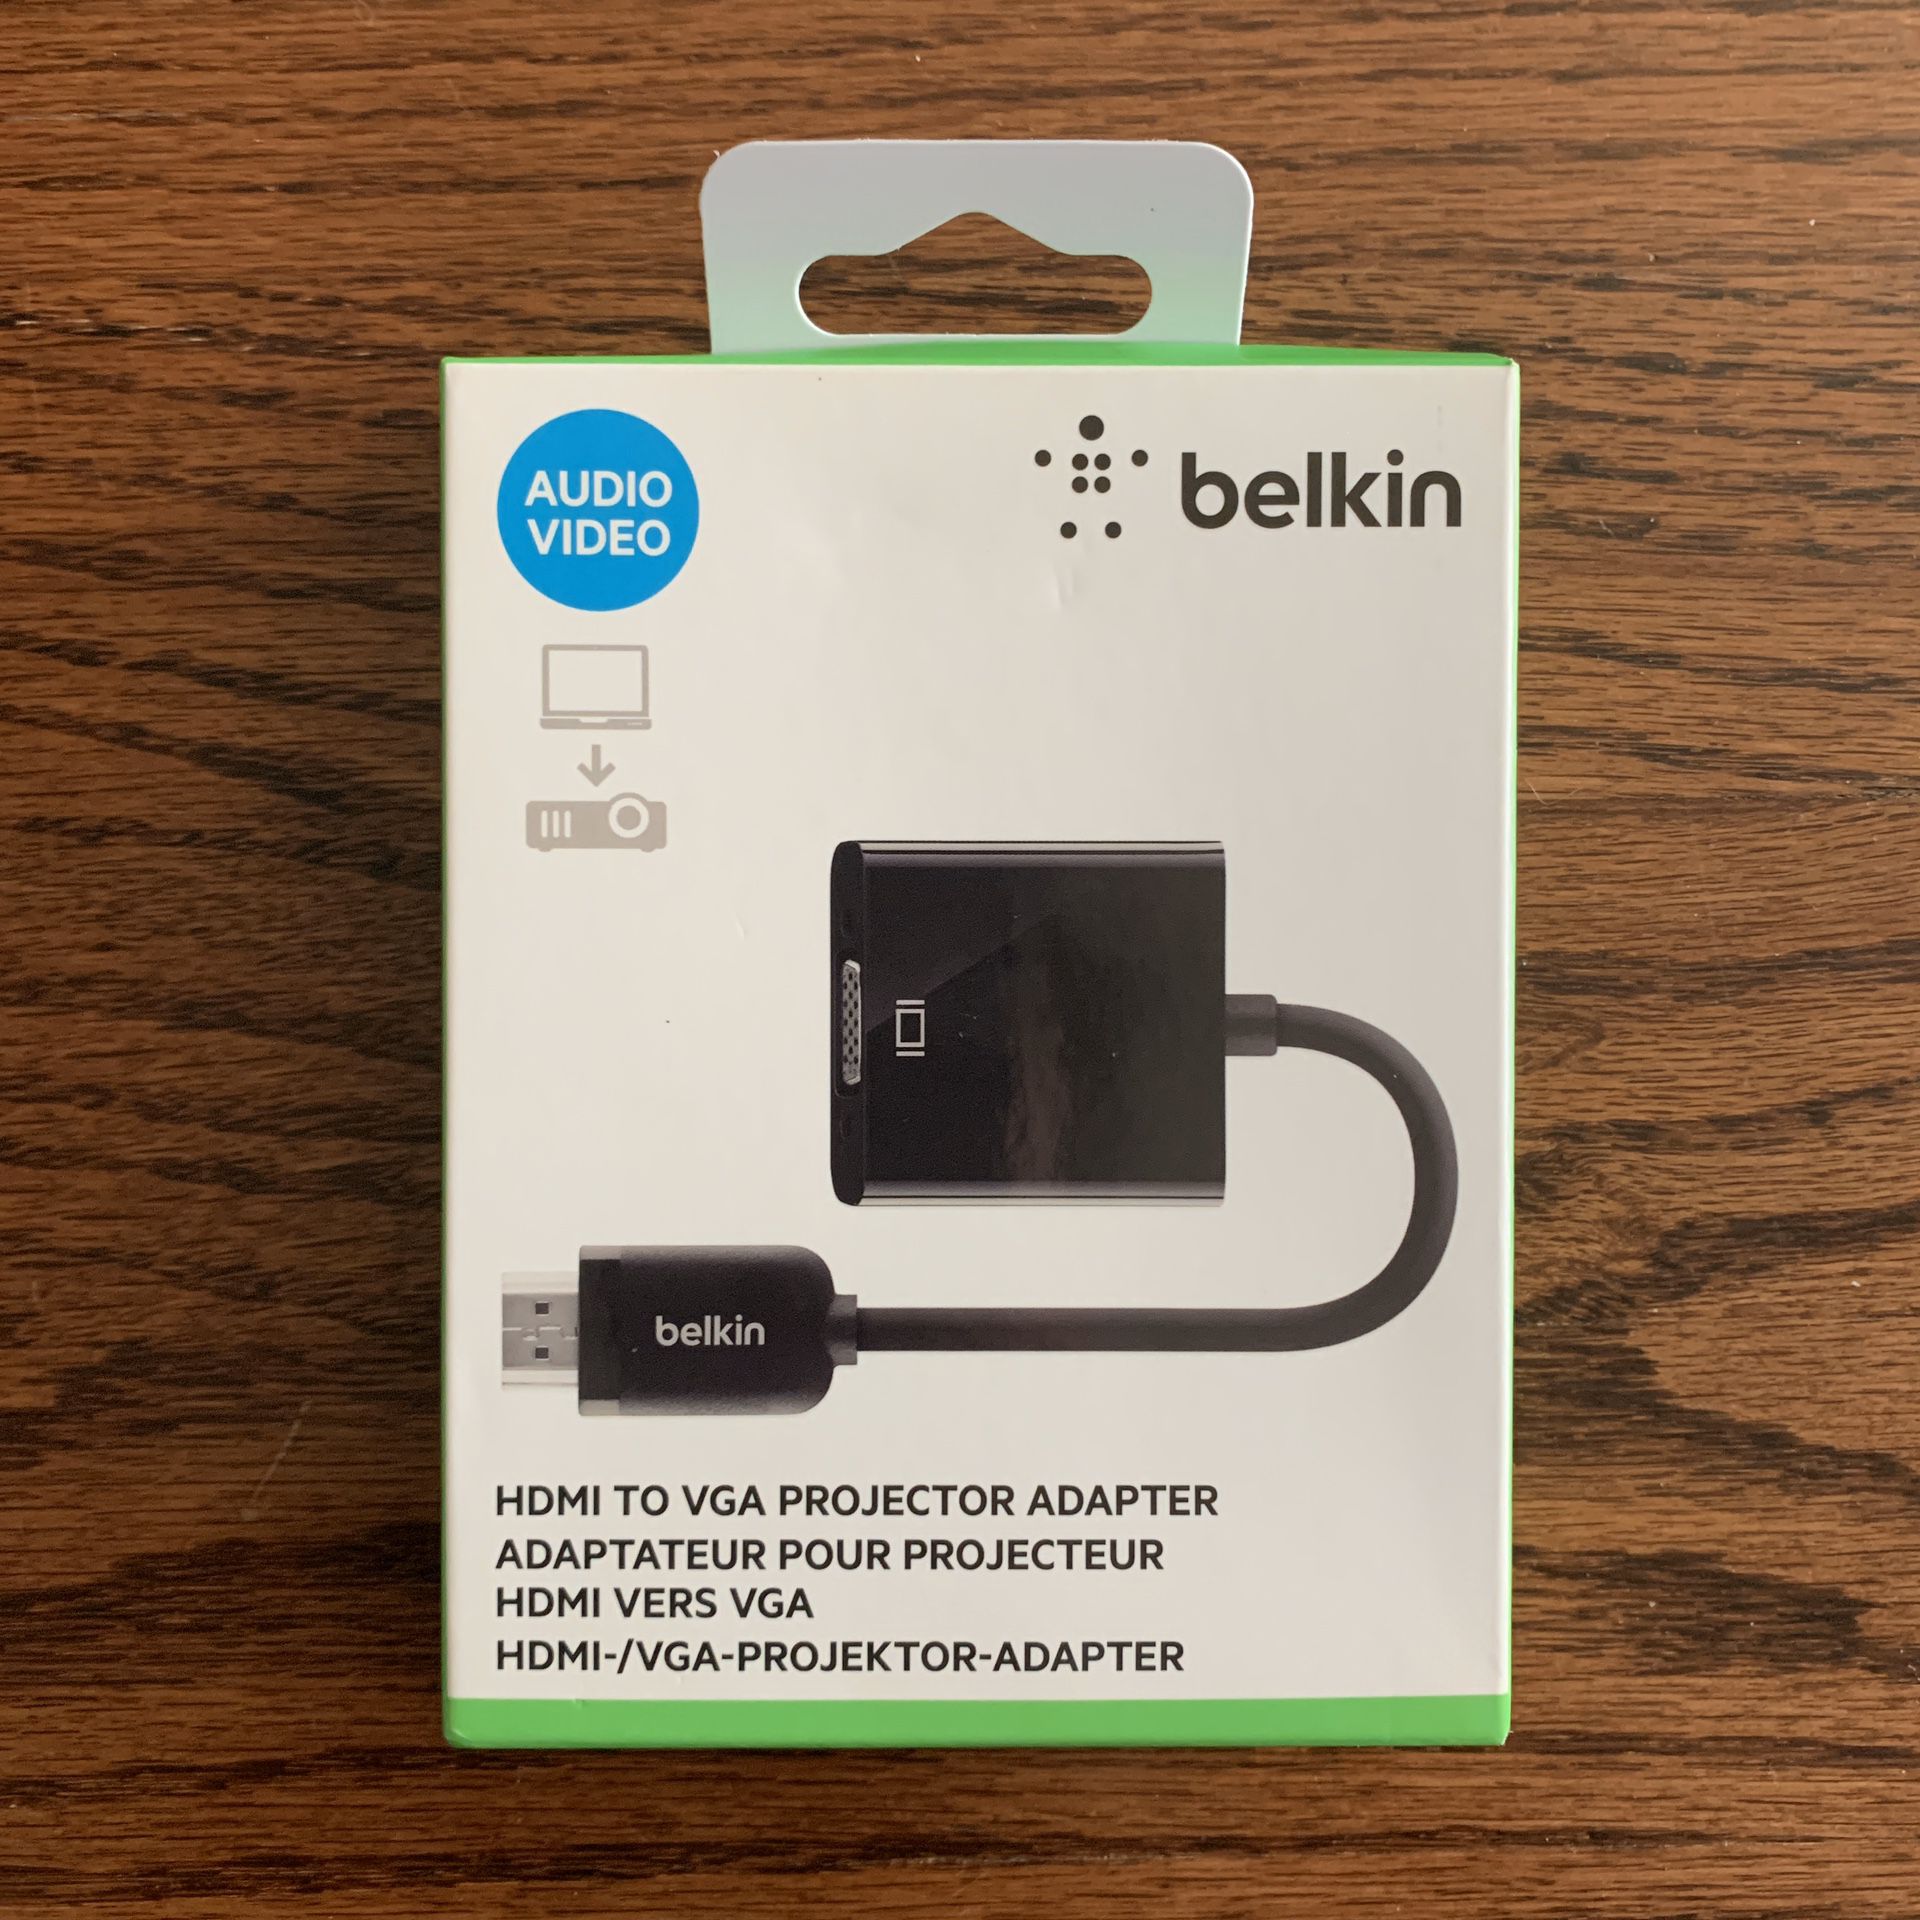 Belkin AV10170bt HDMI to VGA Adapter with Micro-USB Power and Audio Support, Compatible with Apple TV 4K and Most TVs